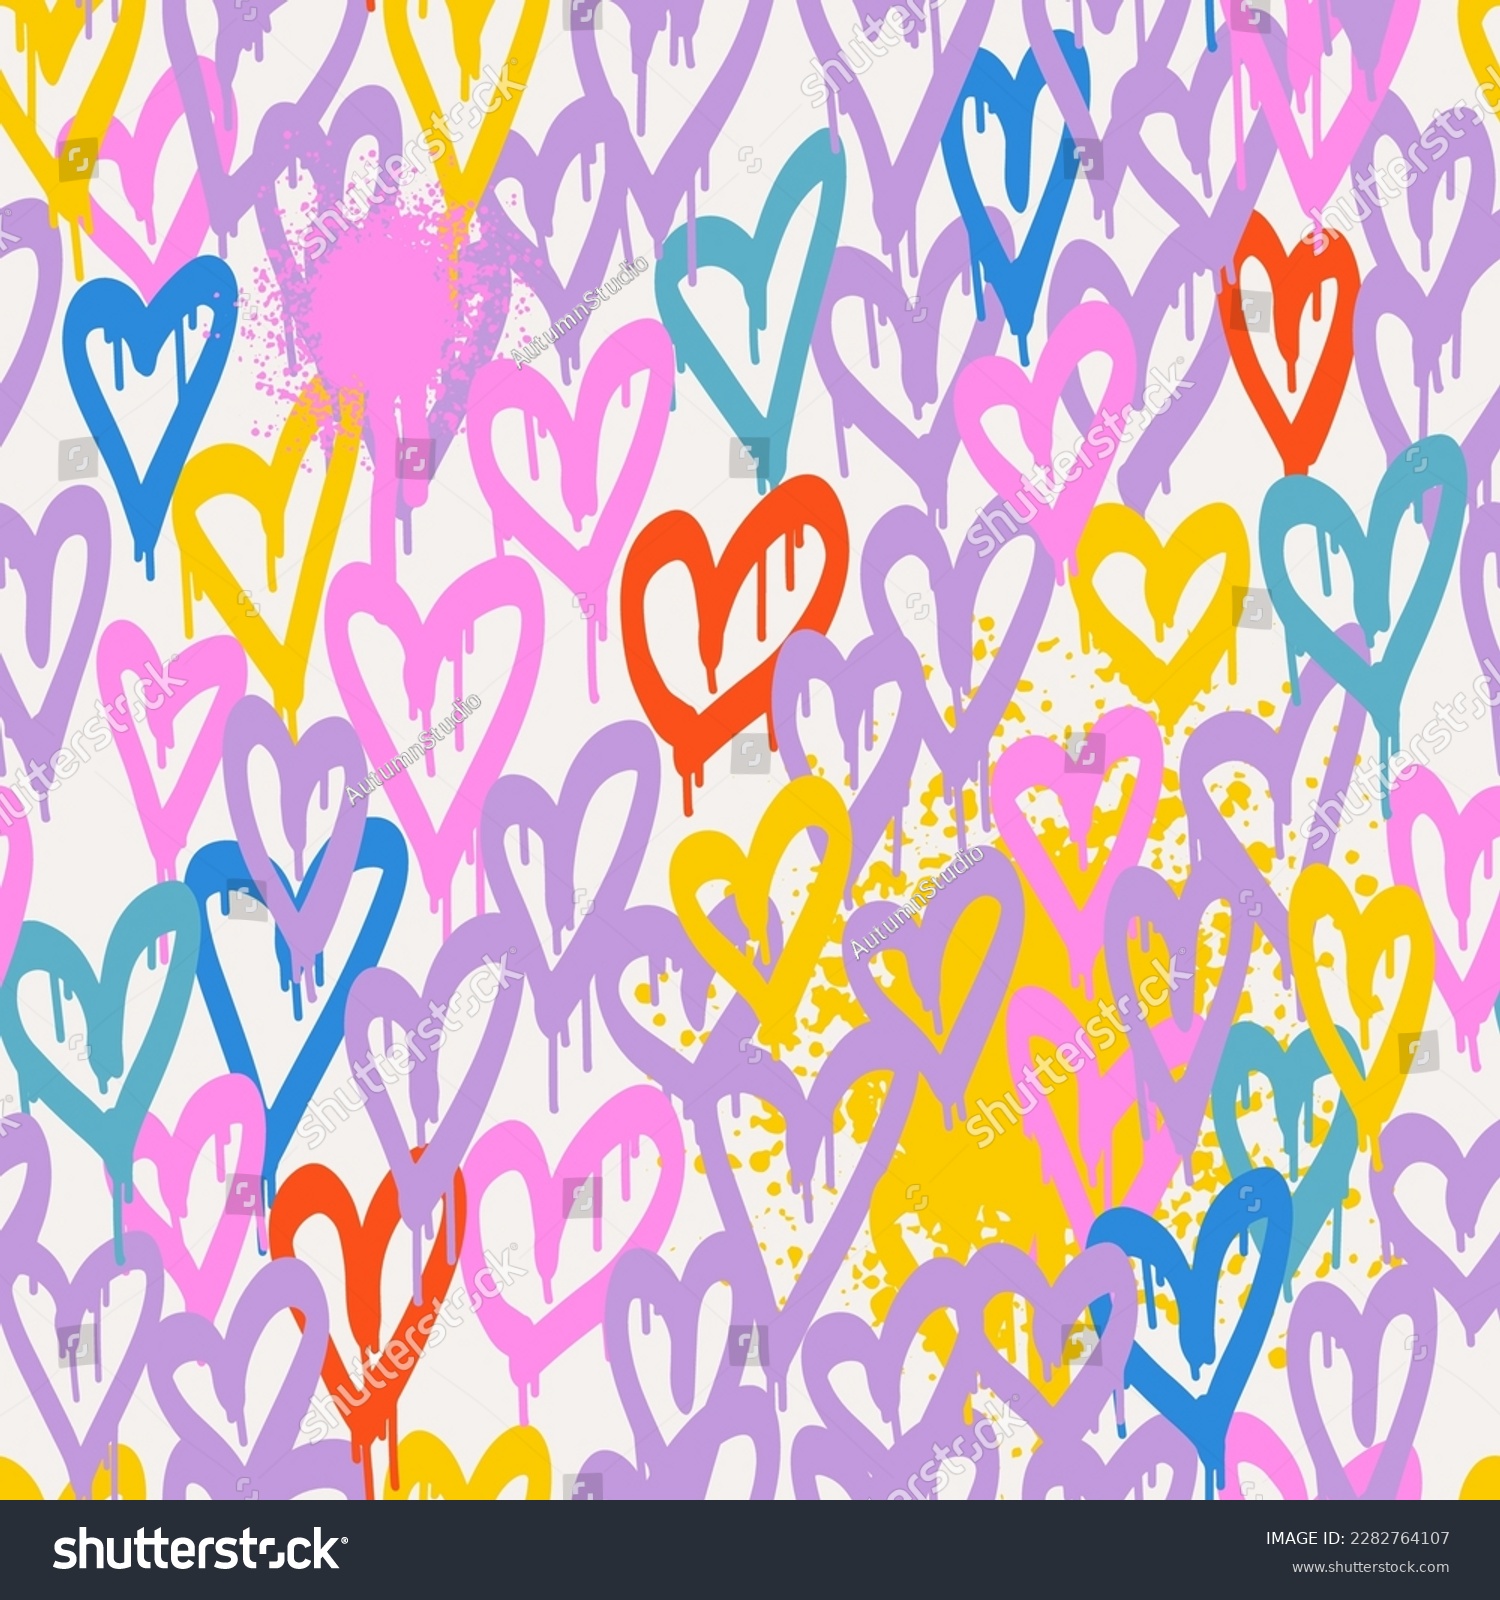 SVG of Graffiti hearts. Urban seamless pattern in street art style. Abstract print. Graphic underground unisex design for t-shirts and sweatshirt in bright neon colors. svg